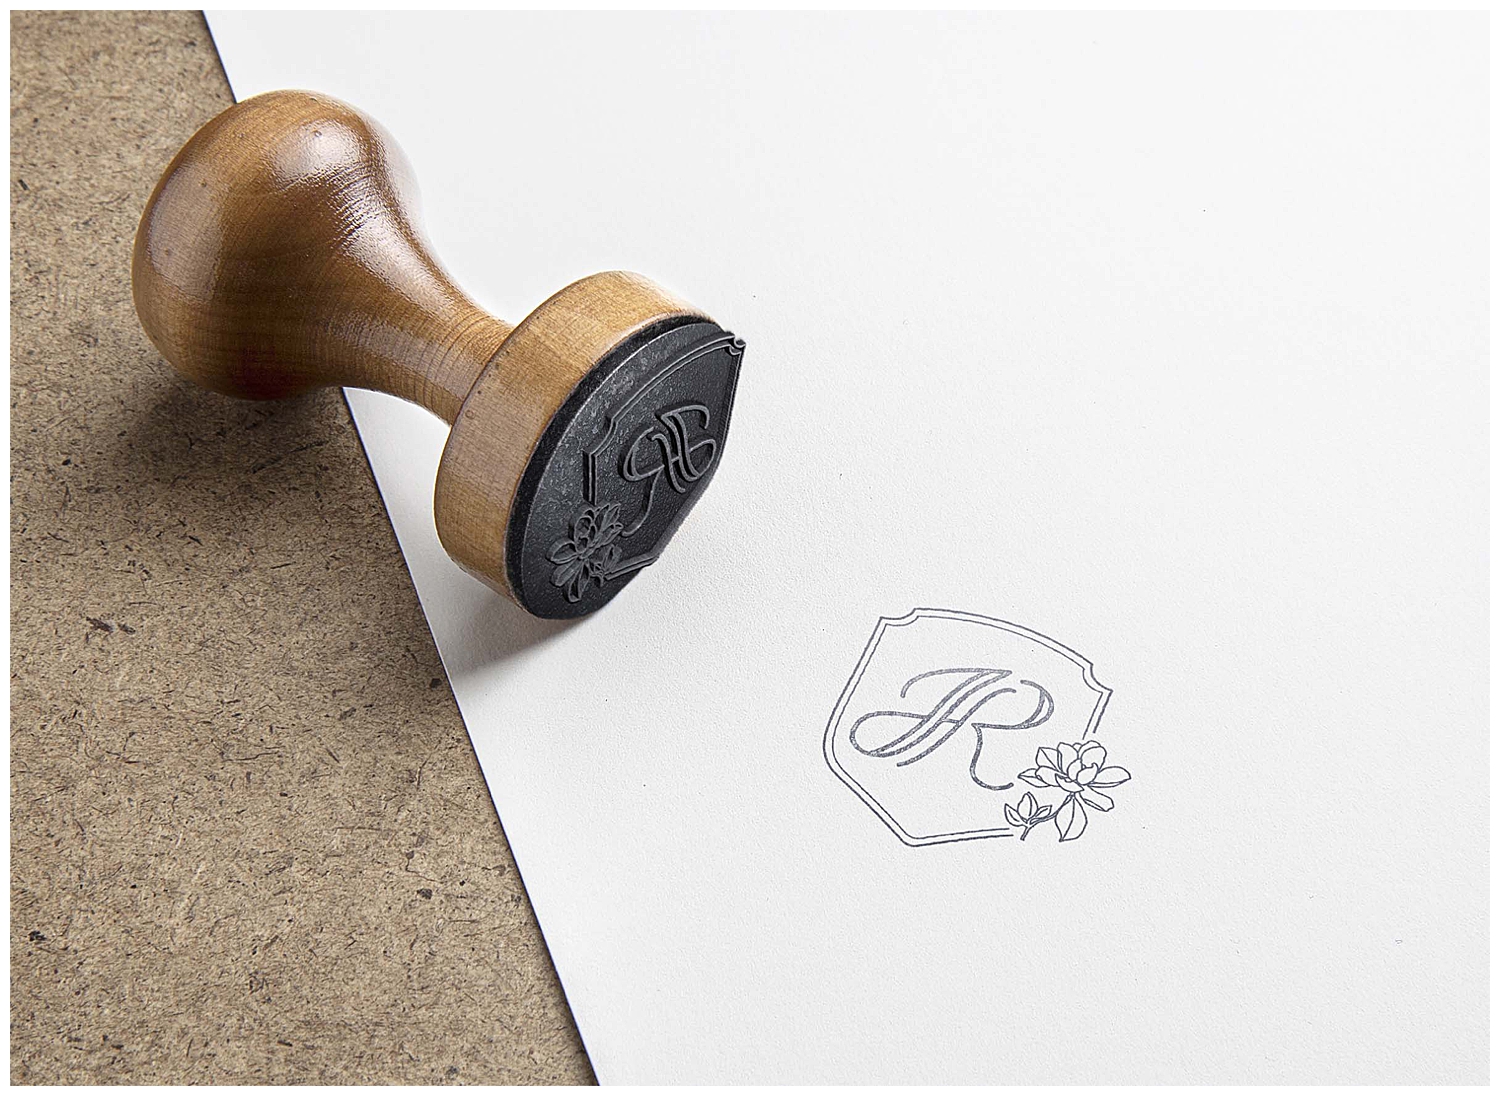 A stamp stamps the paper with Juliann Riggs Photography's crest on it.